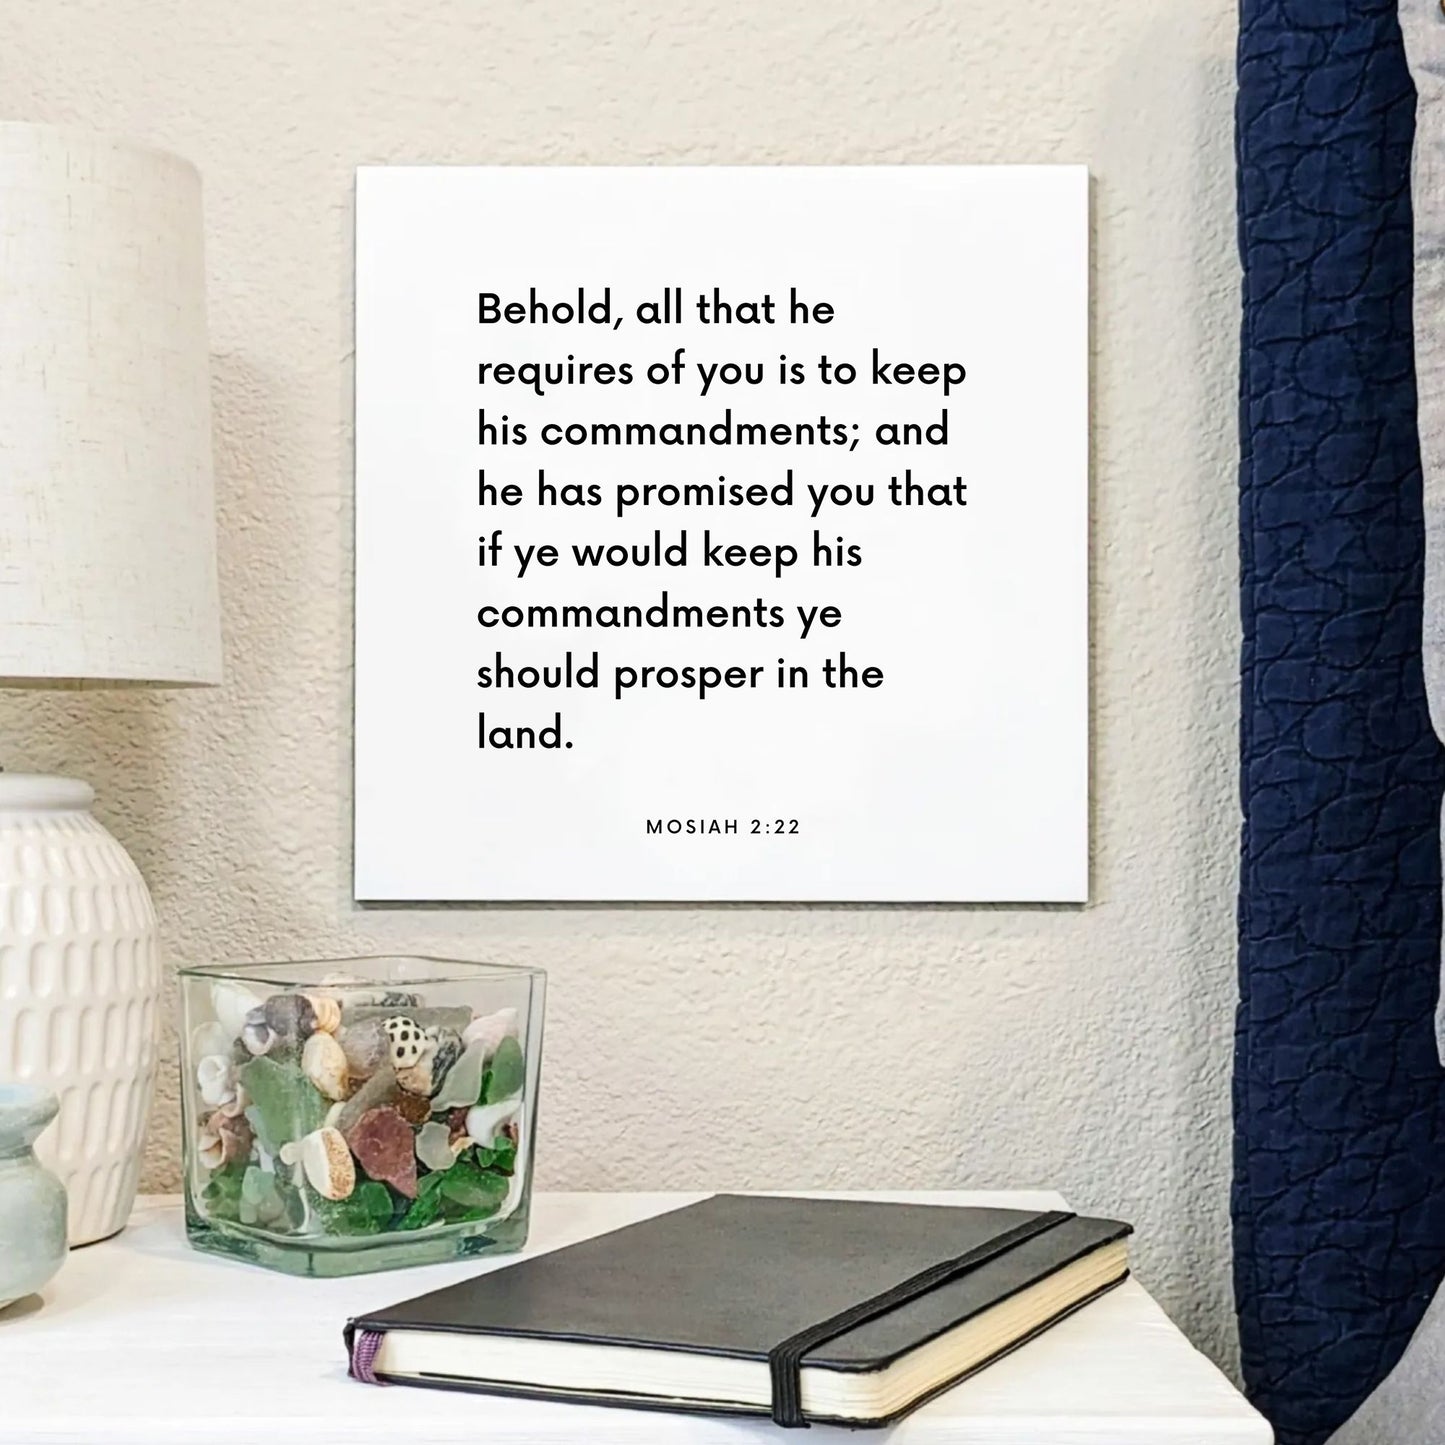 Bedside mouting of the scripture tile for Mosiah 2:22 - "All that he requires of you is to keep his commandments"